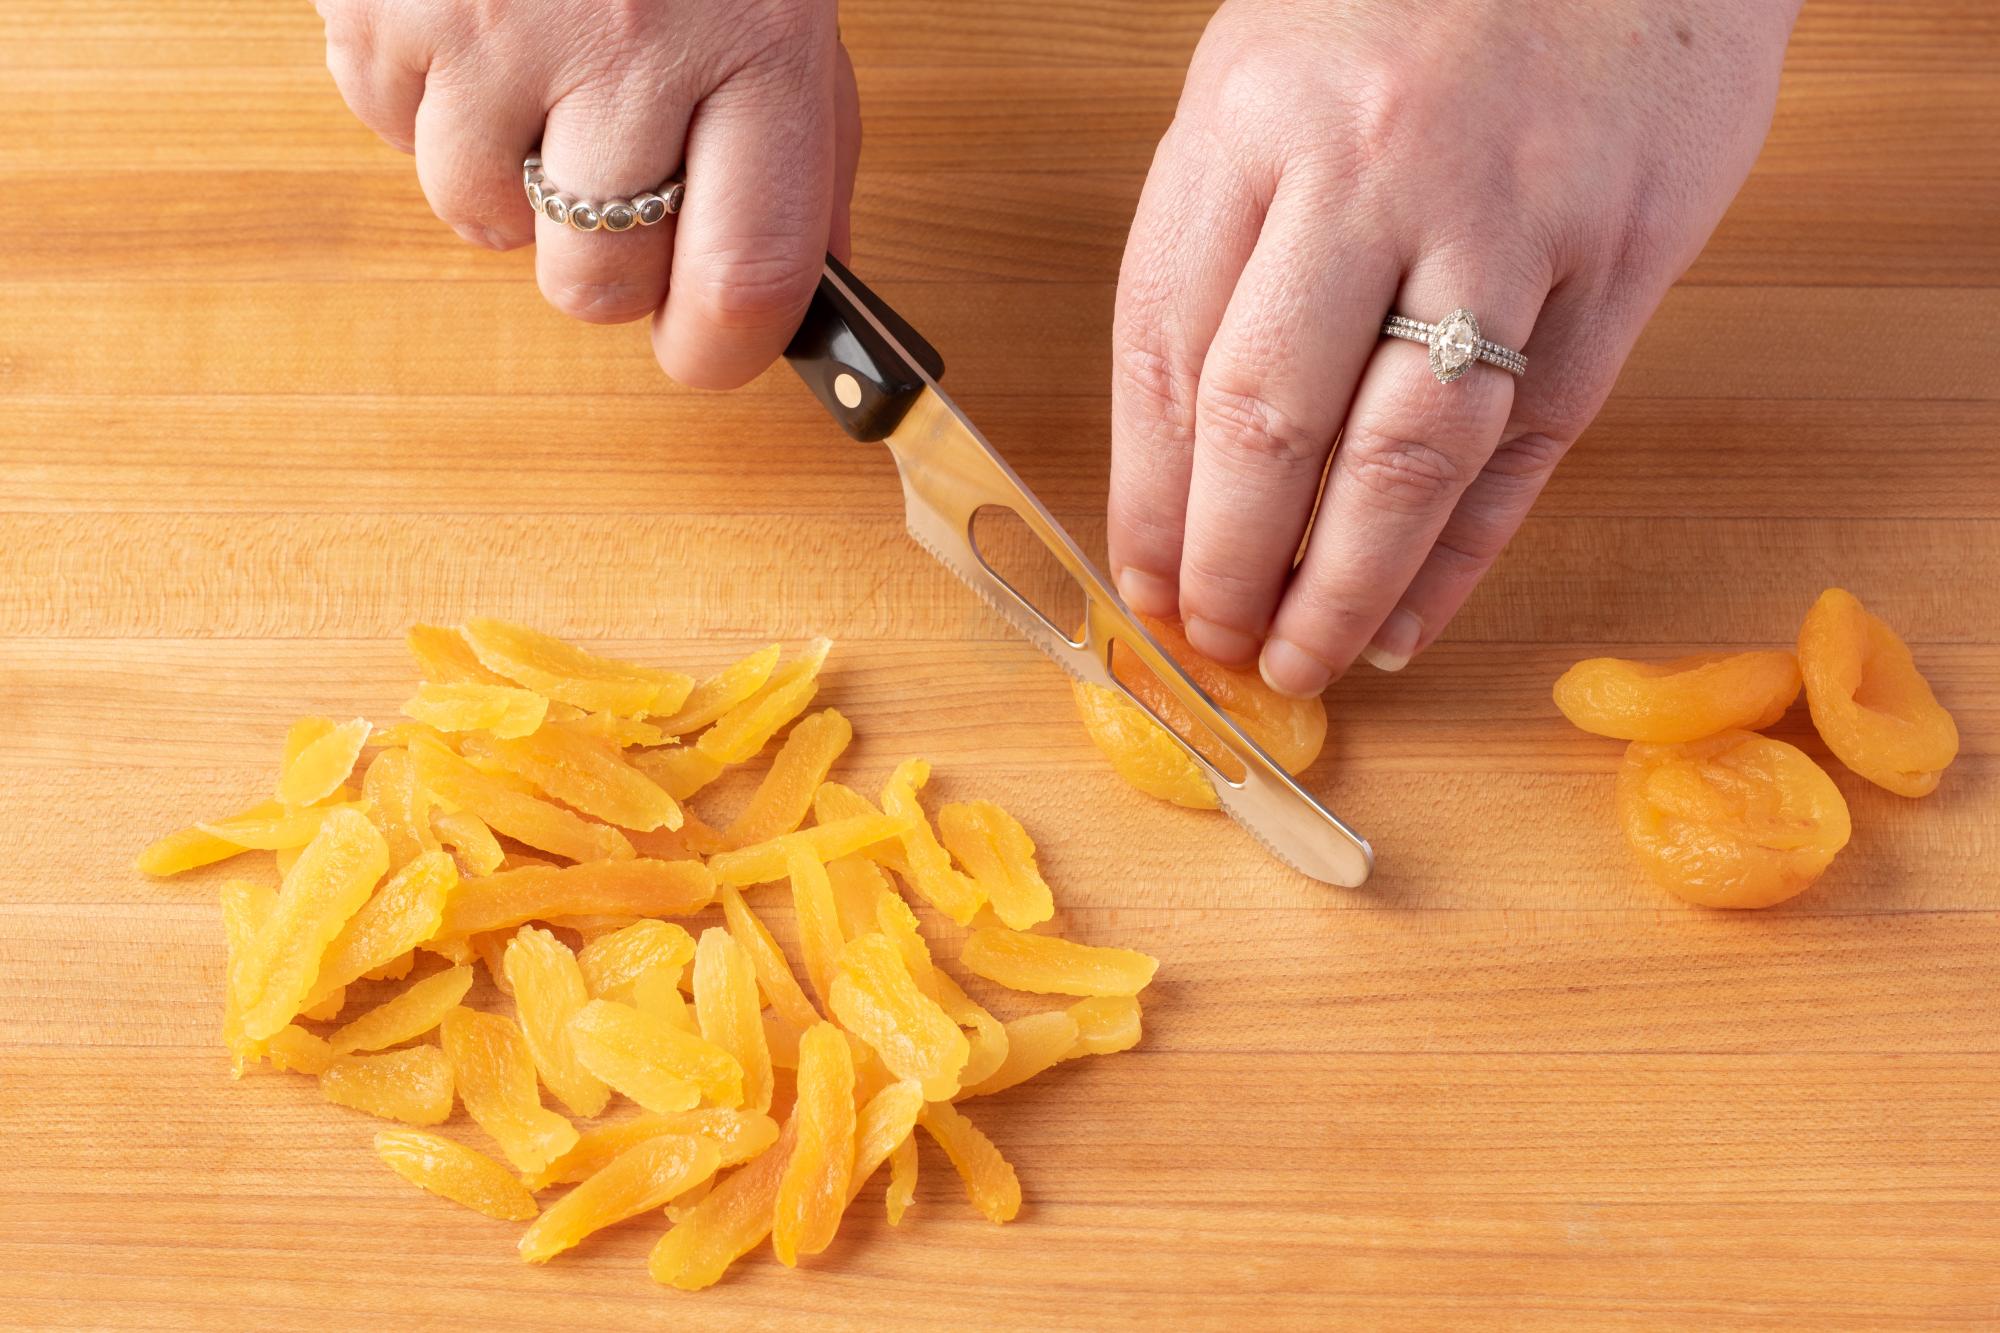 Use a Mini Cheese Knife to slice the dried apricots.